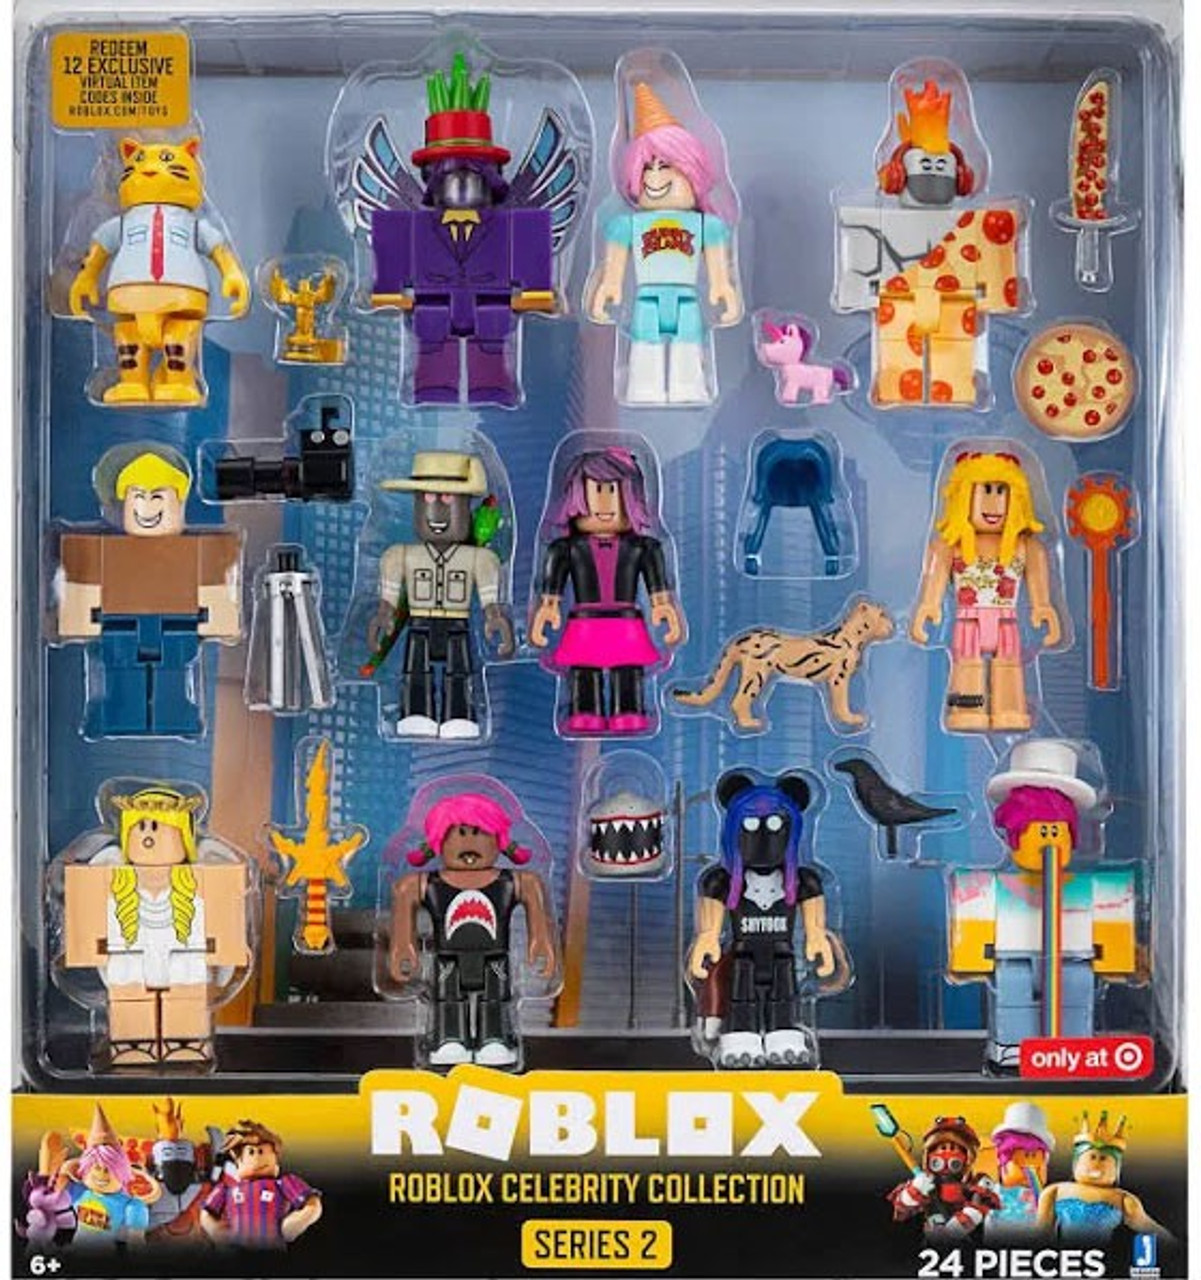 Roblox Series 2 Celebrity Collection Exclusive 3 Action Figure 12 - roblox zombie attack 20 pieces play set jazwarez free shipping